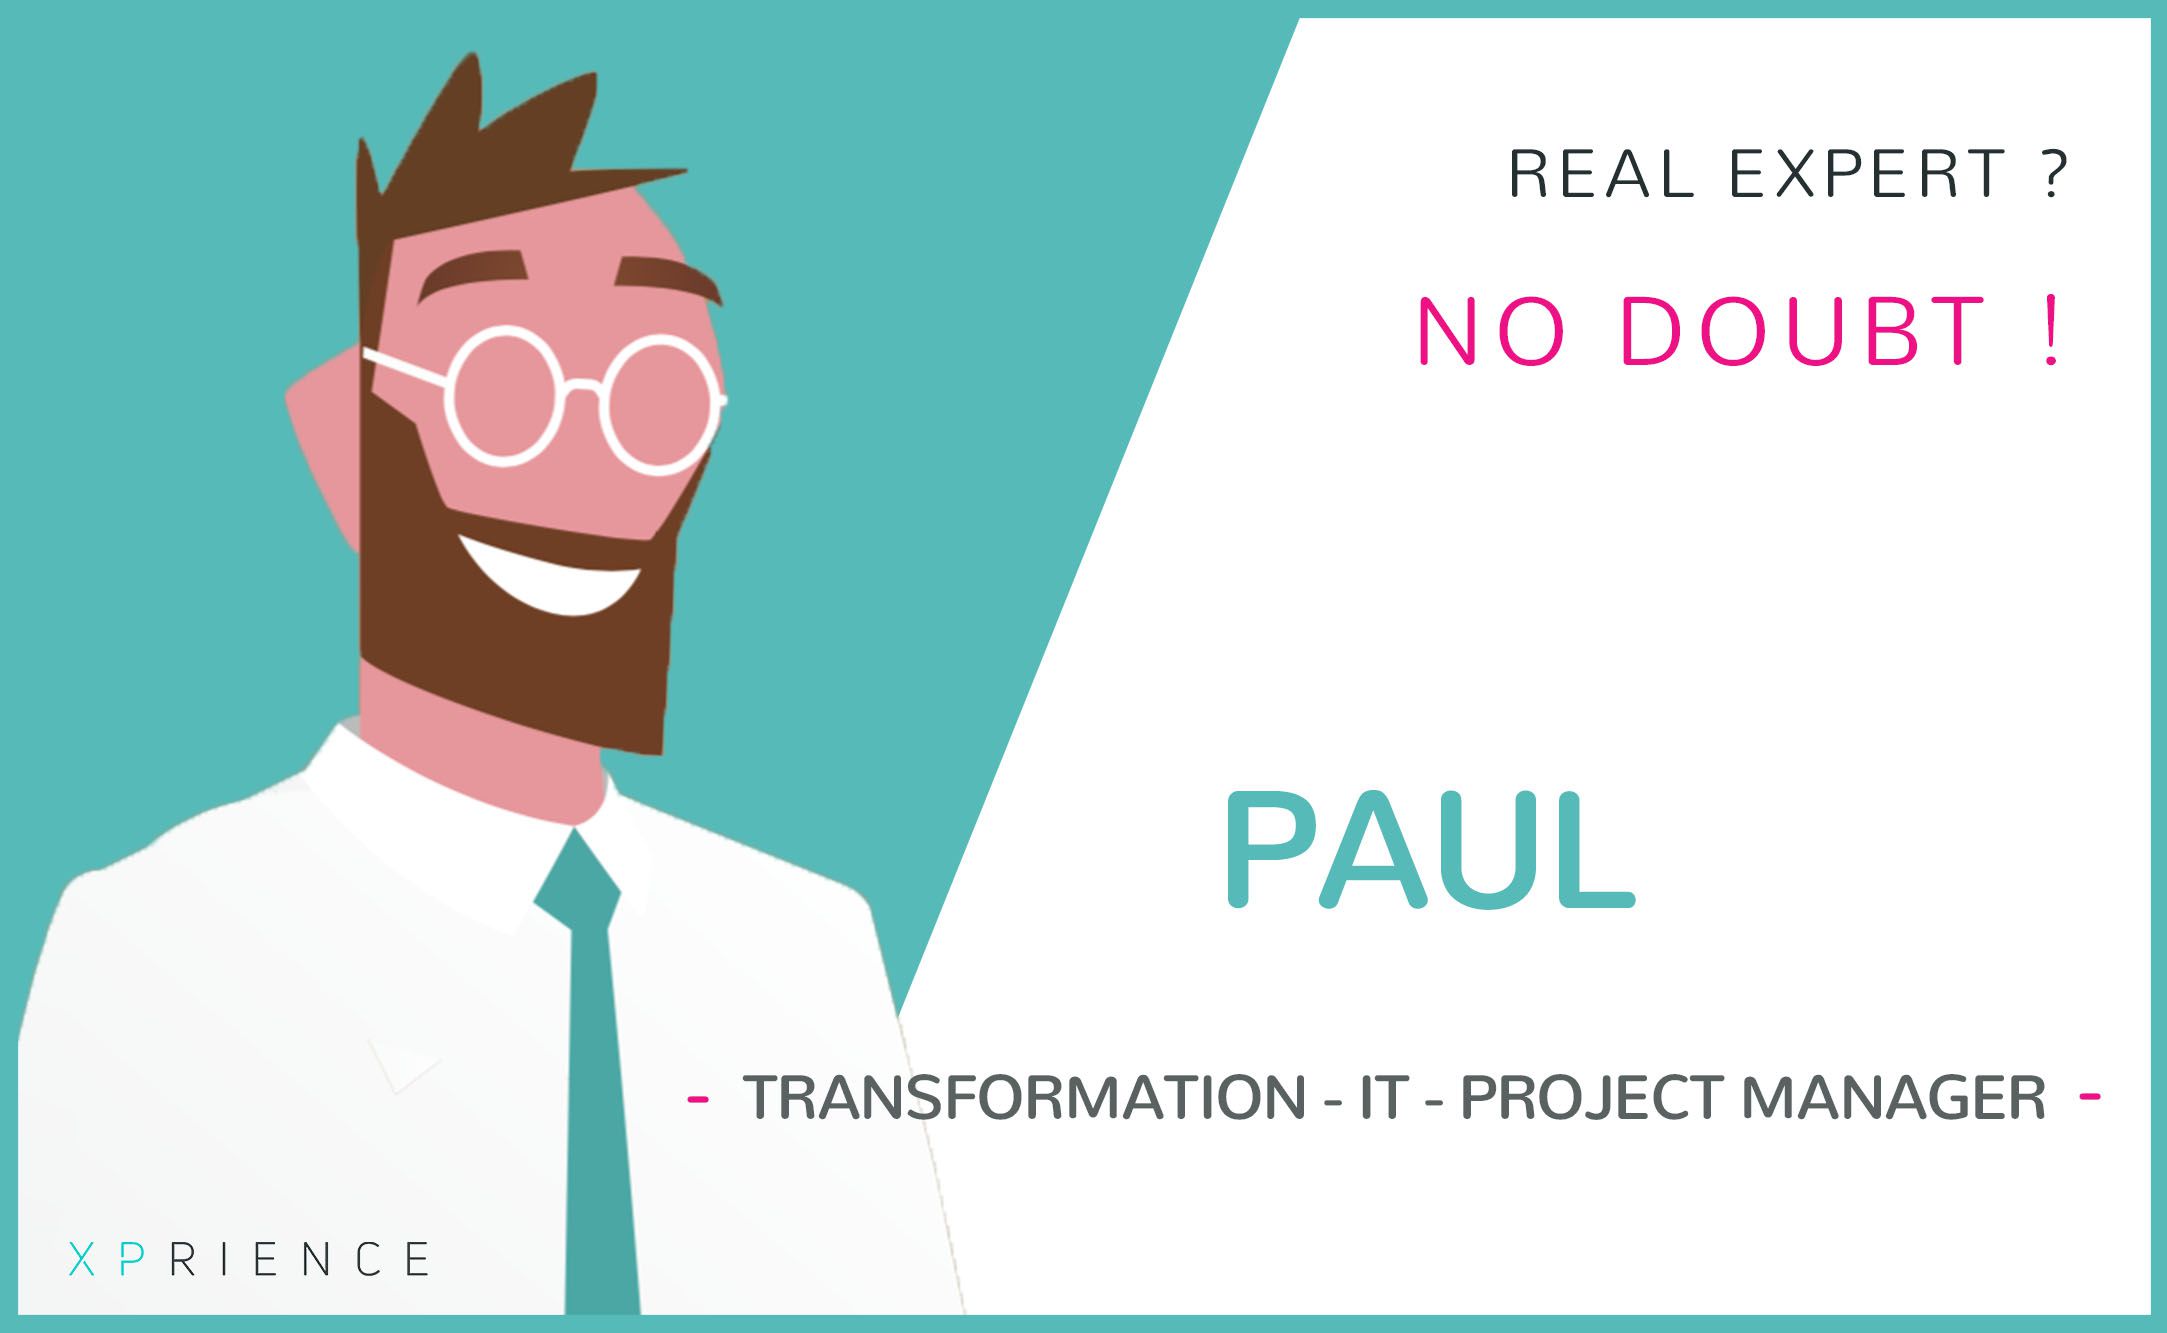 transformation - IT - project manager